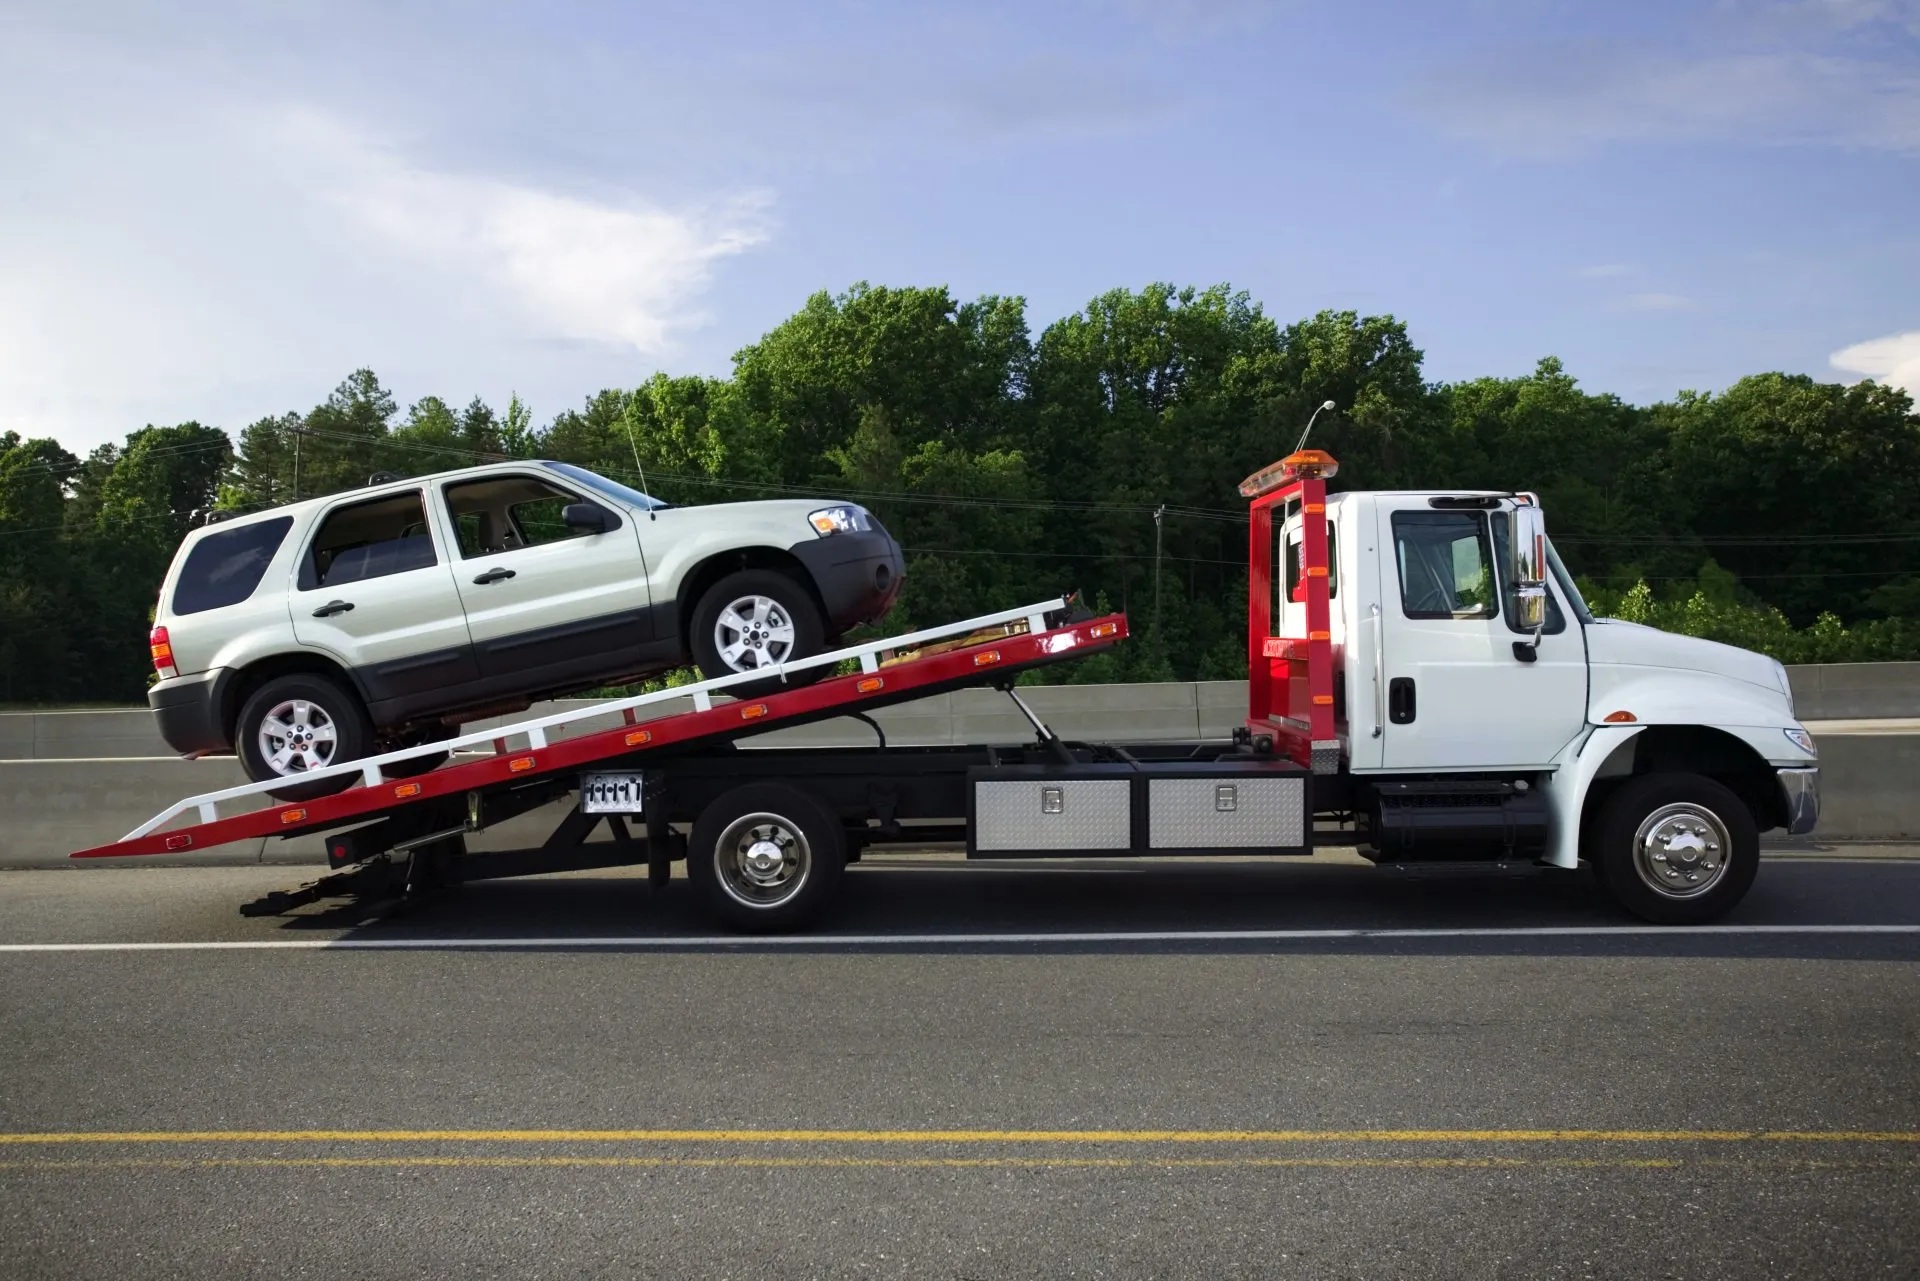 5 Key Benefits of Choosing My Big Tow as Your Towing Service